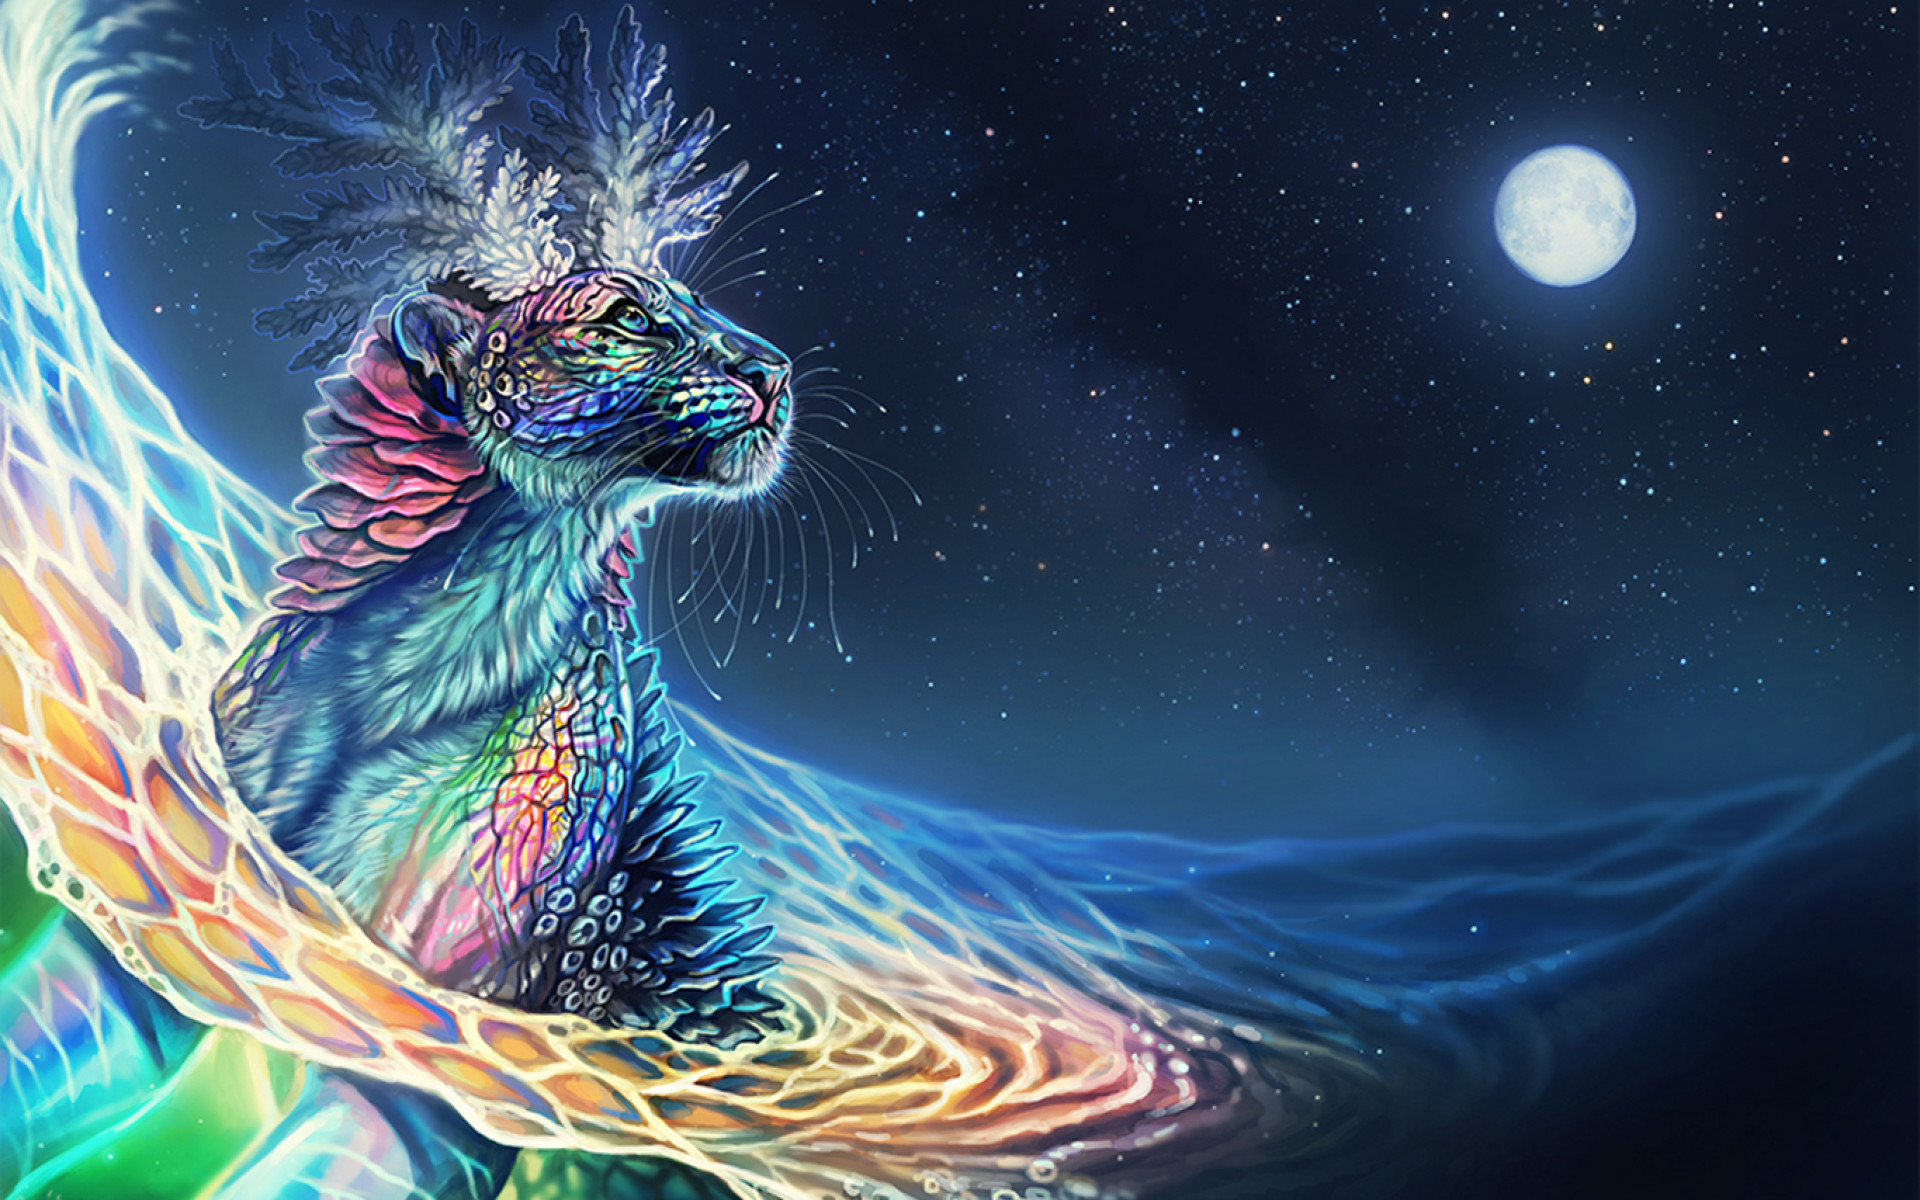 1920x1200 Image: Colorful Cheetah Full Moon wallpapers and stock photos. Â«